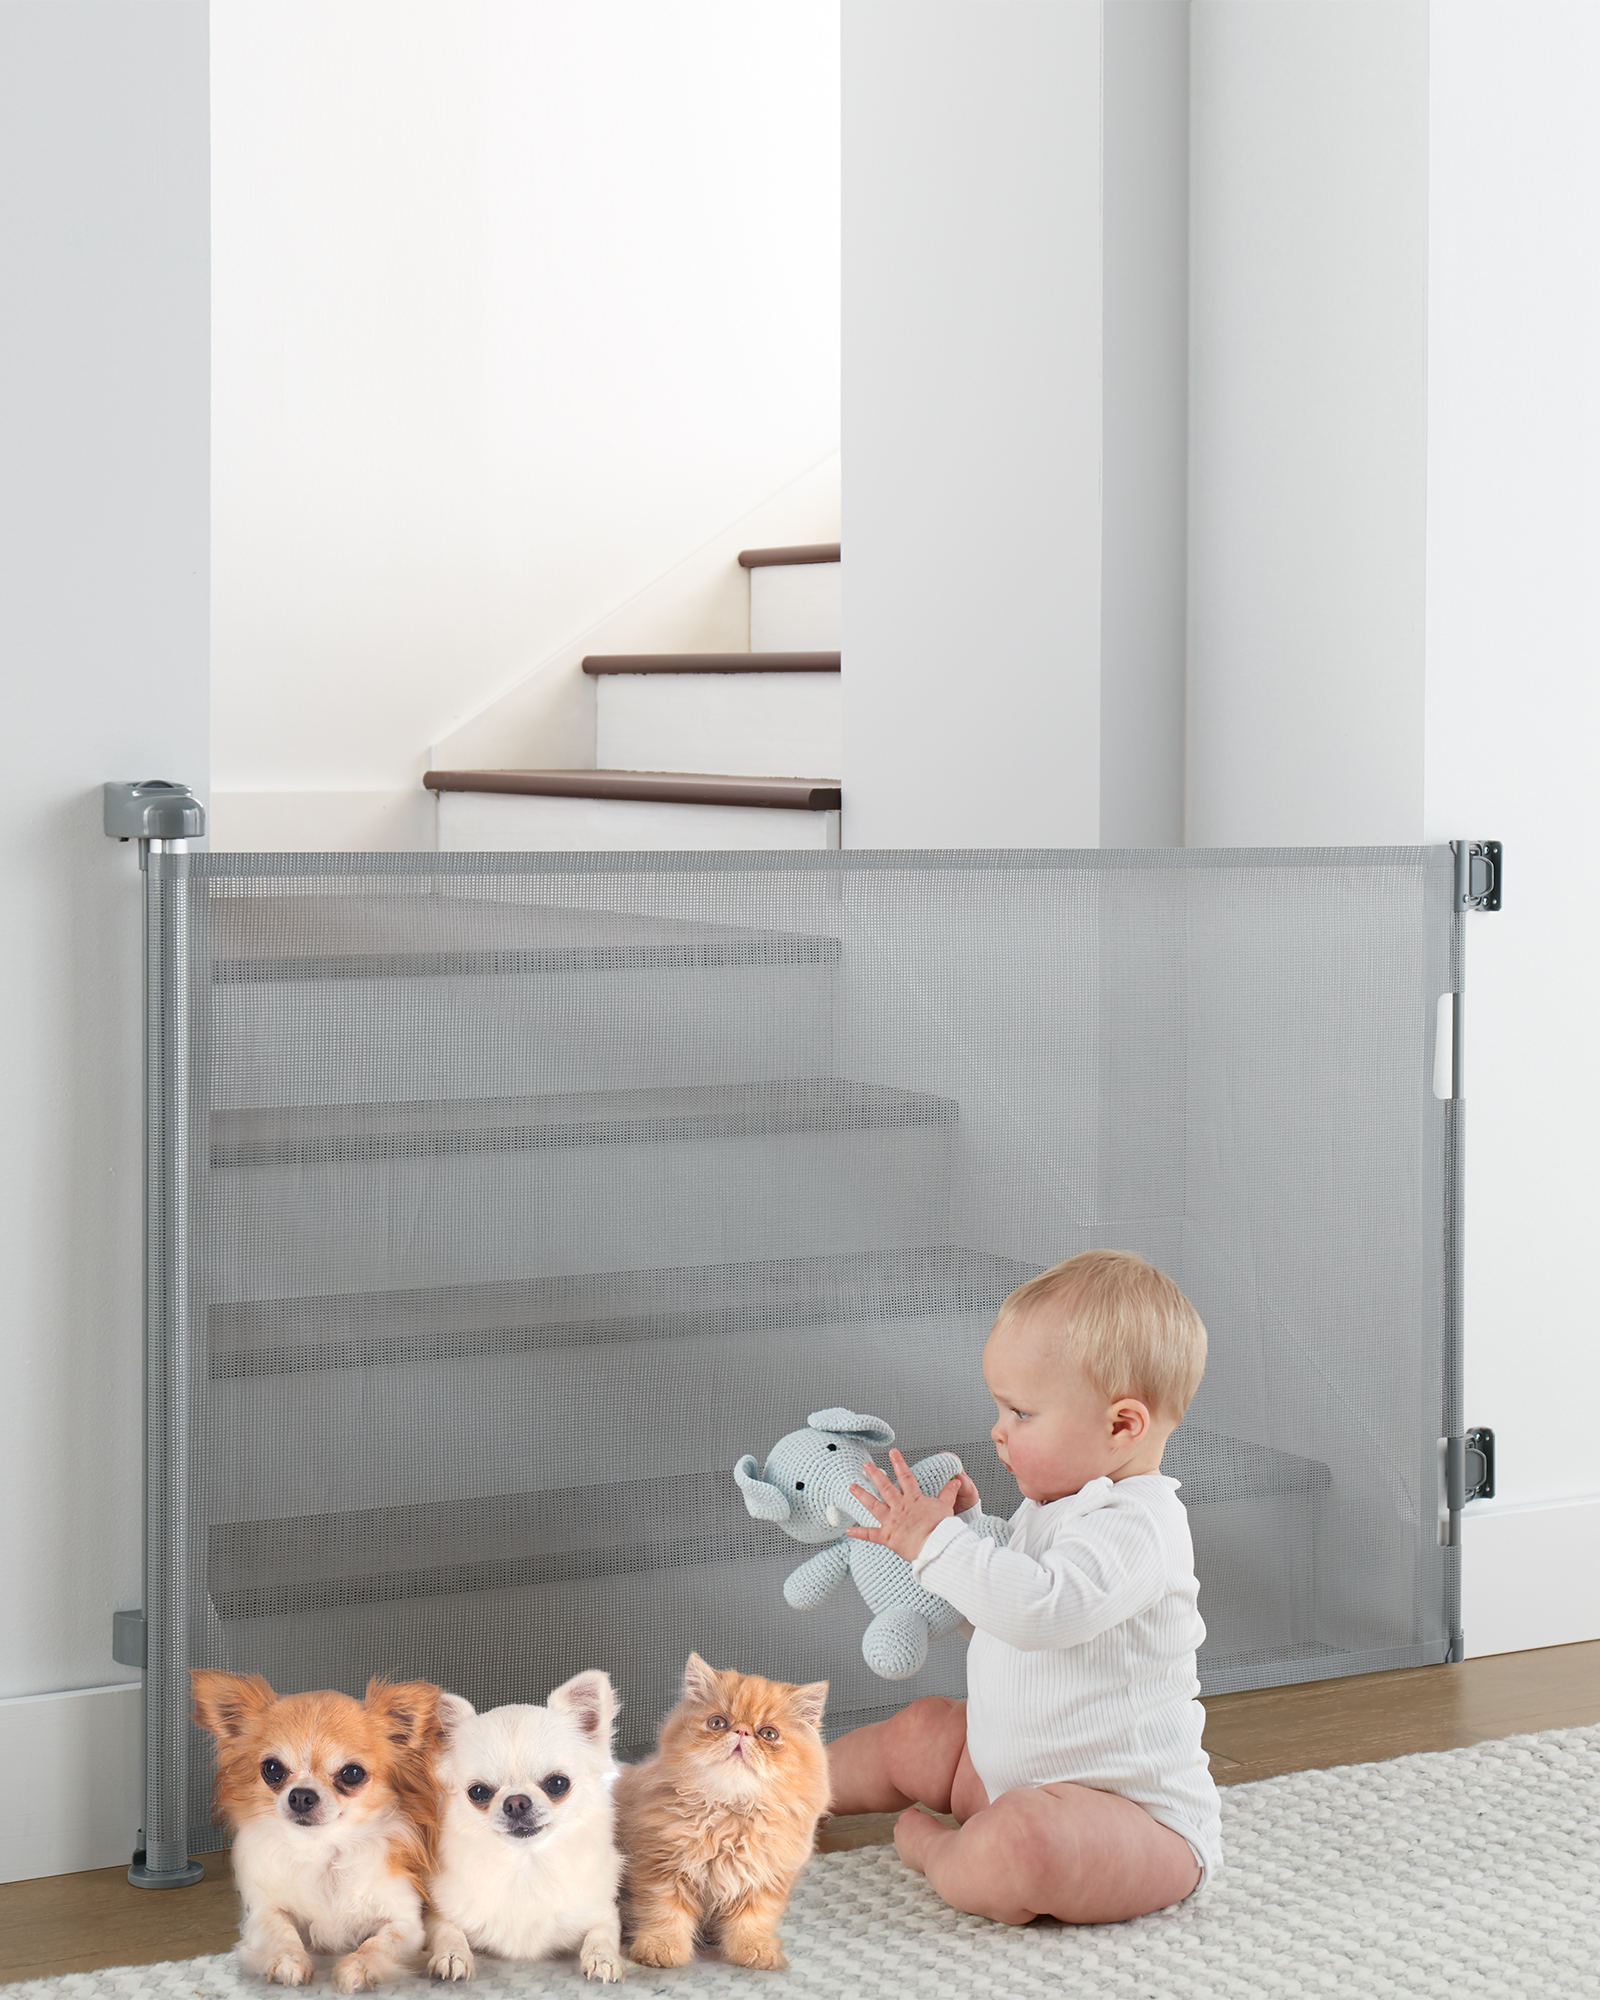 Retractable Mesh Baby & Dog Pet Safety Gate for Stairs & Doorways - 33" Tall, Extends to 55" Wide - Indoor & Outdoor Child Gates for the House, Gray - image 1 of 9